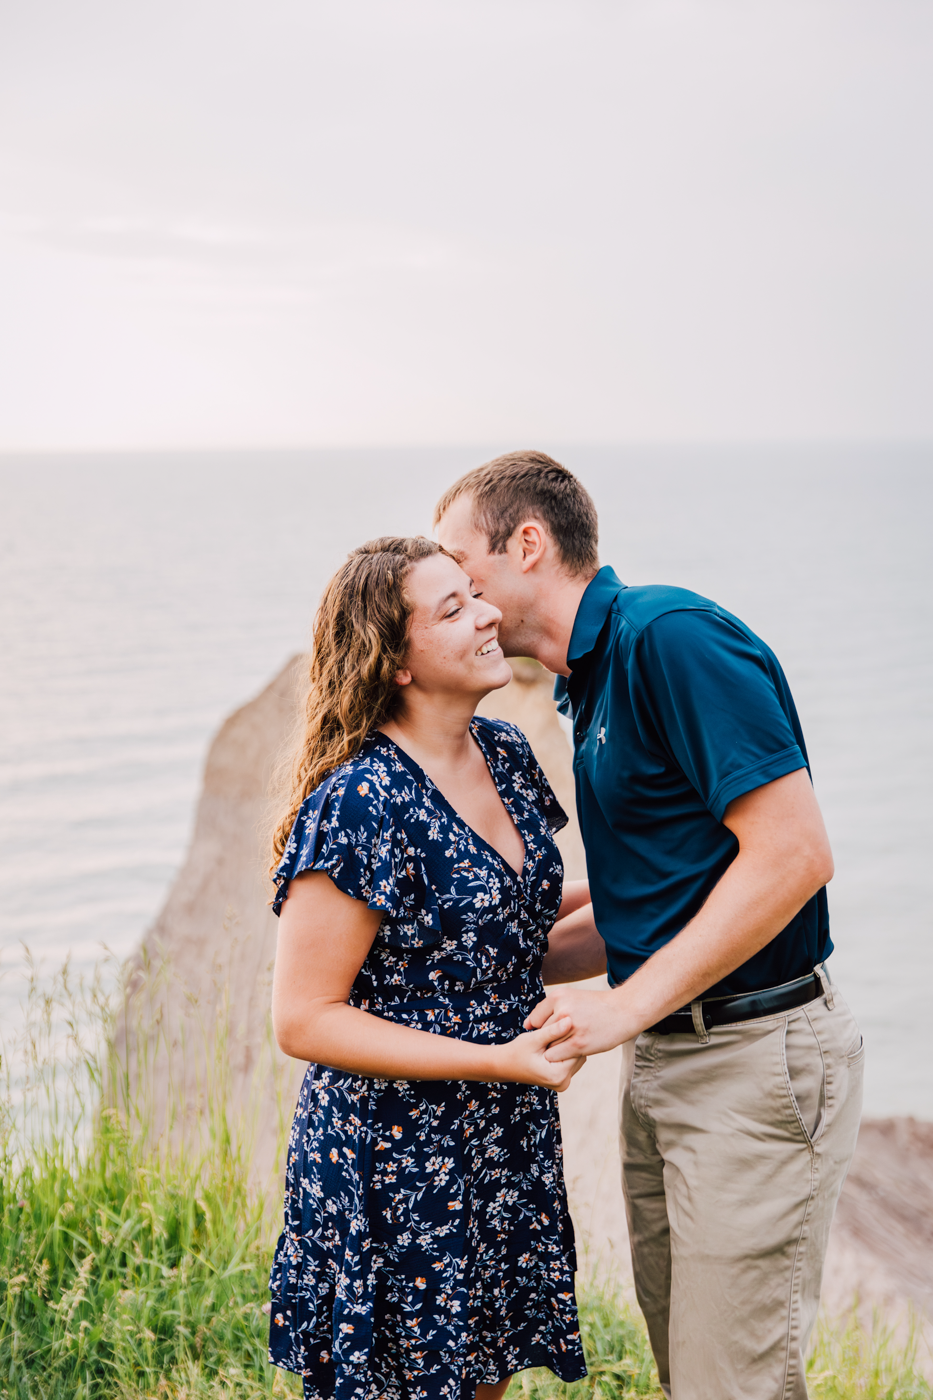  Man kisses his fiance on the cheek overlooking Lake Ontario during their summer engagement photos 